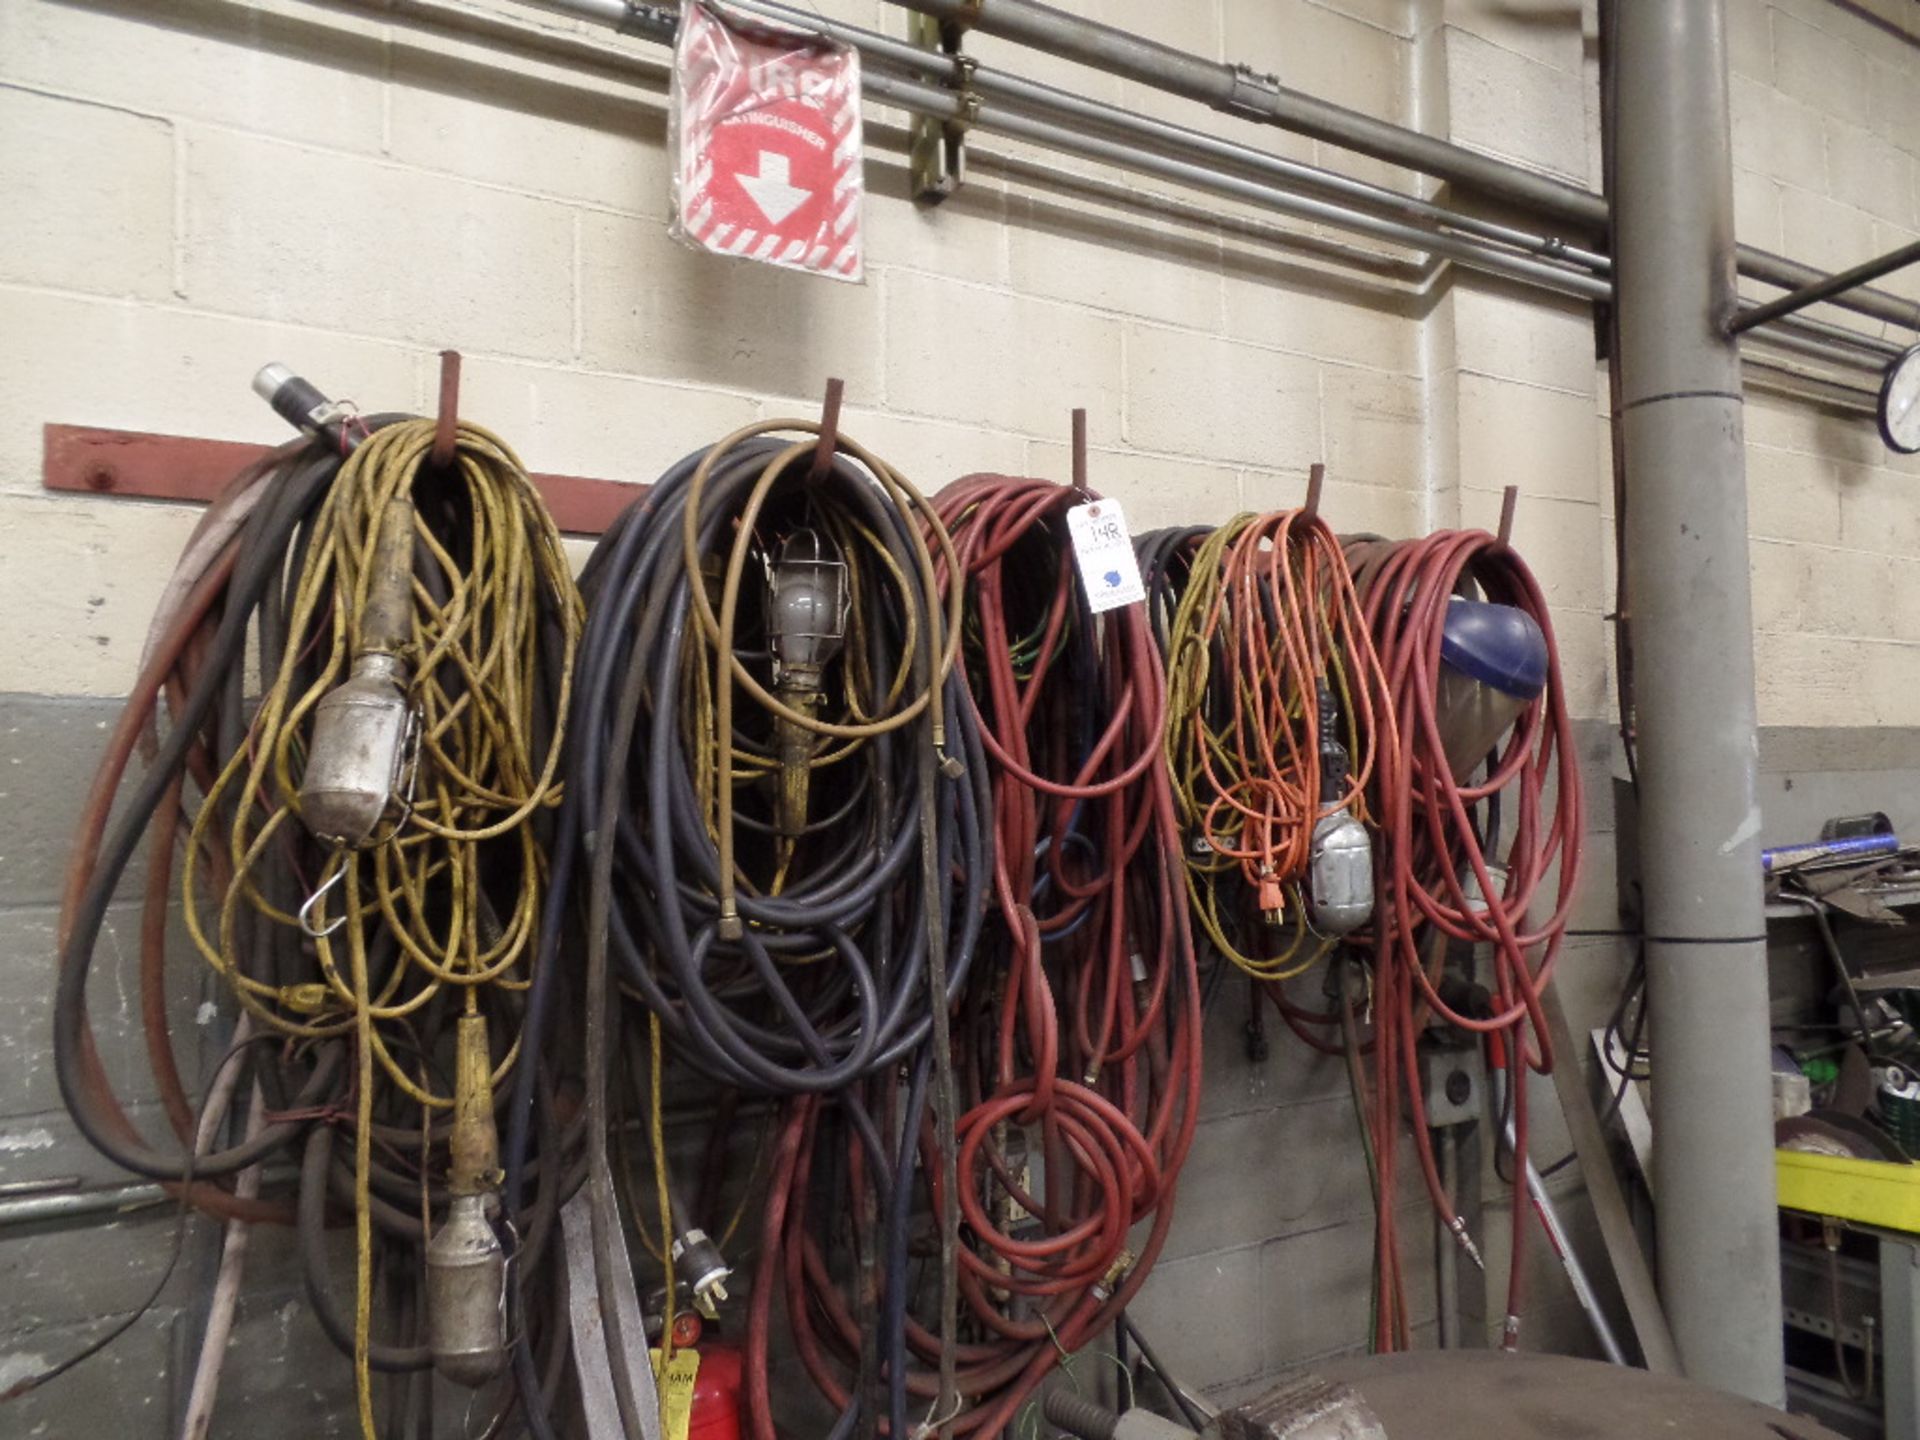 {LOT} Hoses, Extension Cords Lights, Etc. Hanging on wall